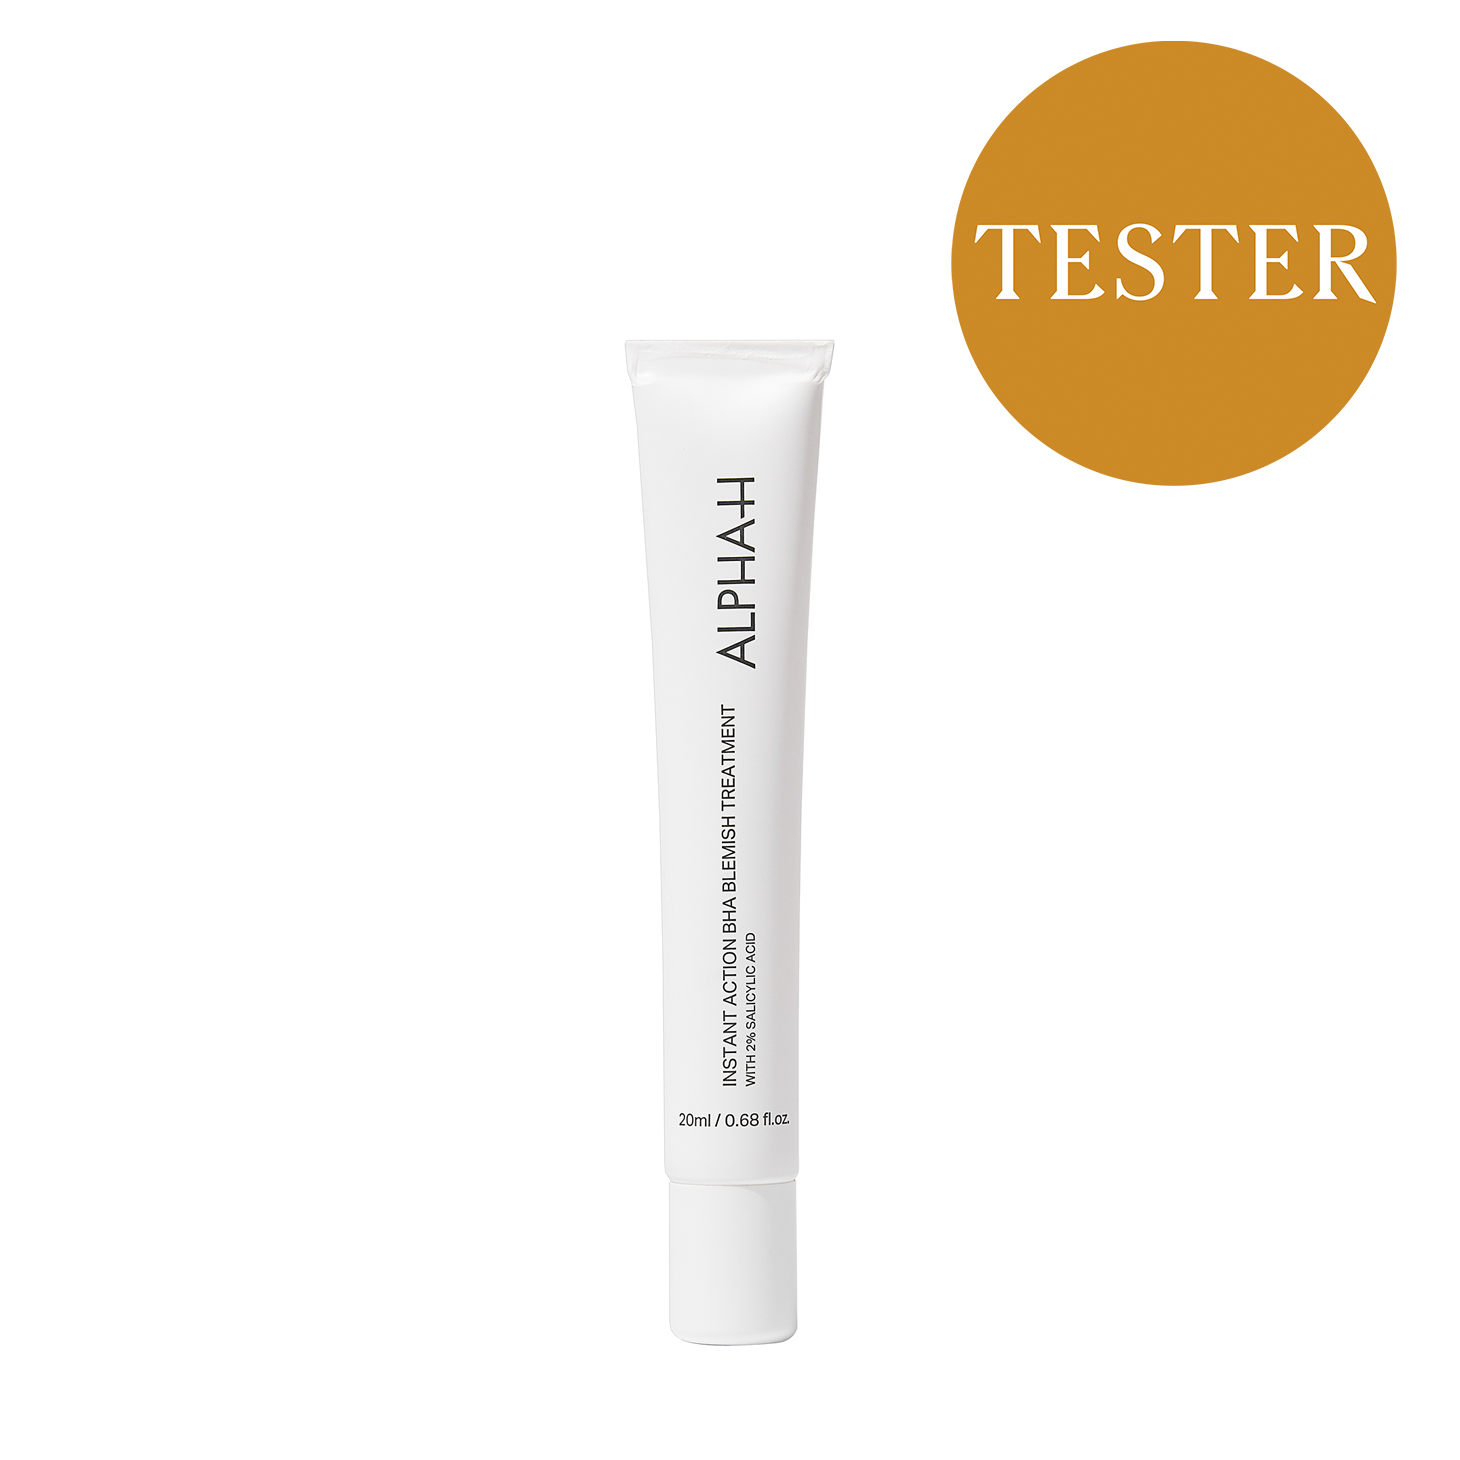 Instand Action BHA Blemish Treatment (Tester)